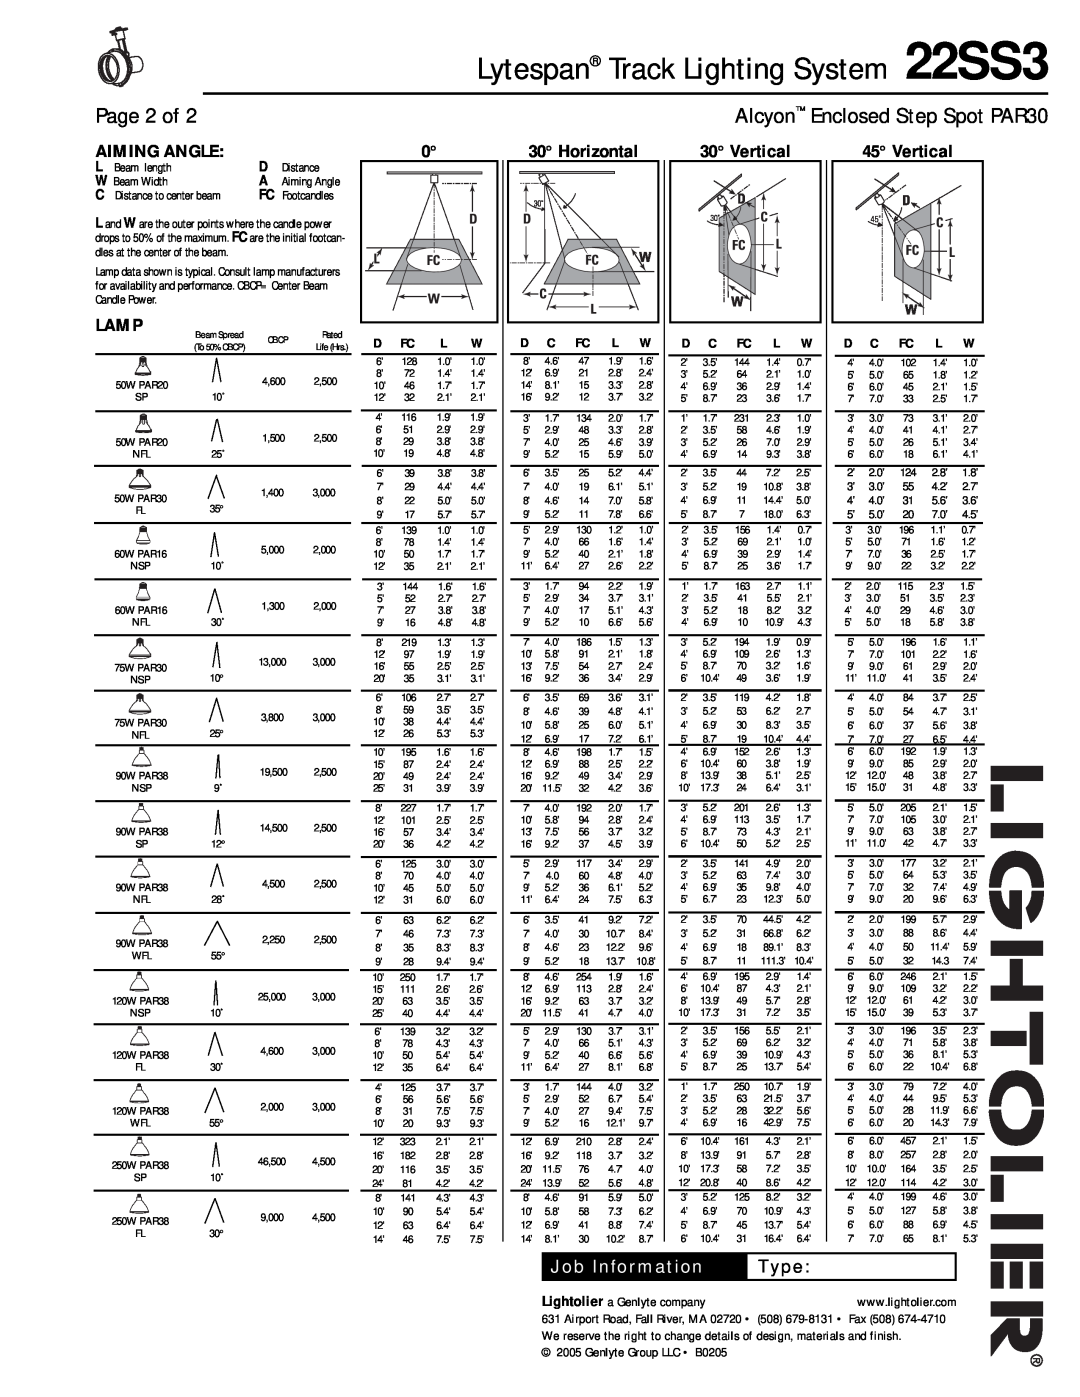 Lightolier manual Page 2 of, Aiming Angle, Lamp, Horizontal, Vertical, Type, Lytespan Track Lighting System 22SS3 